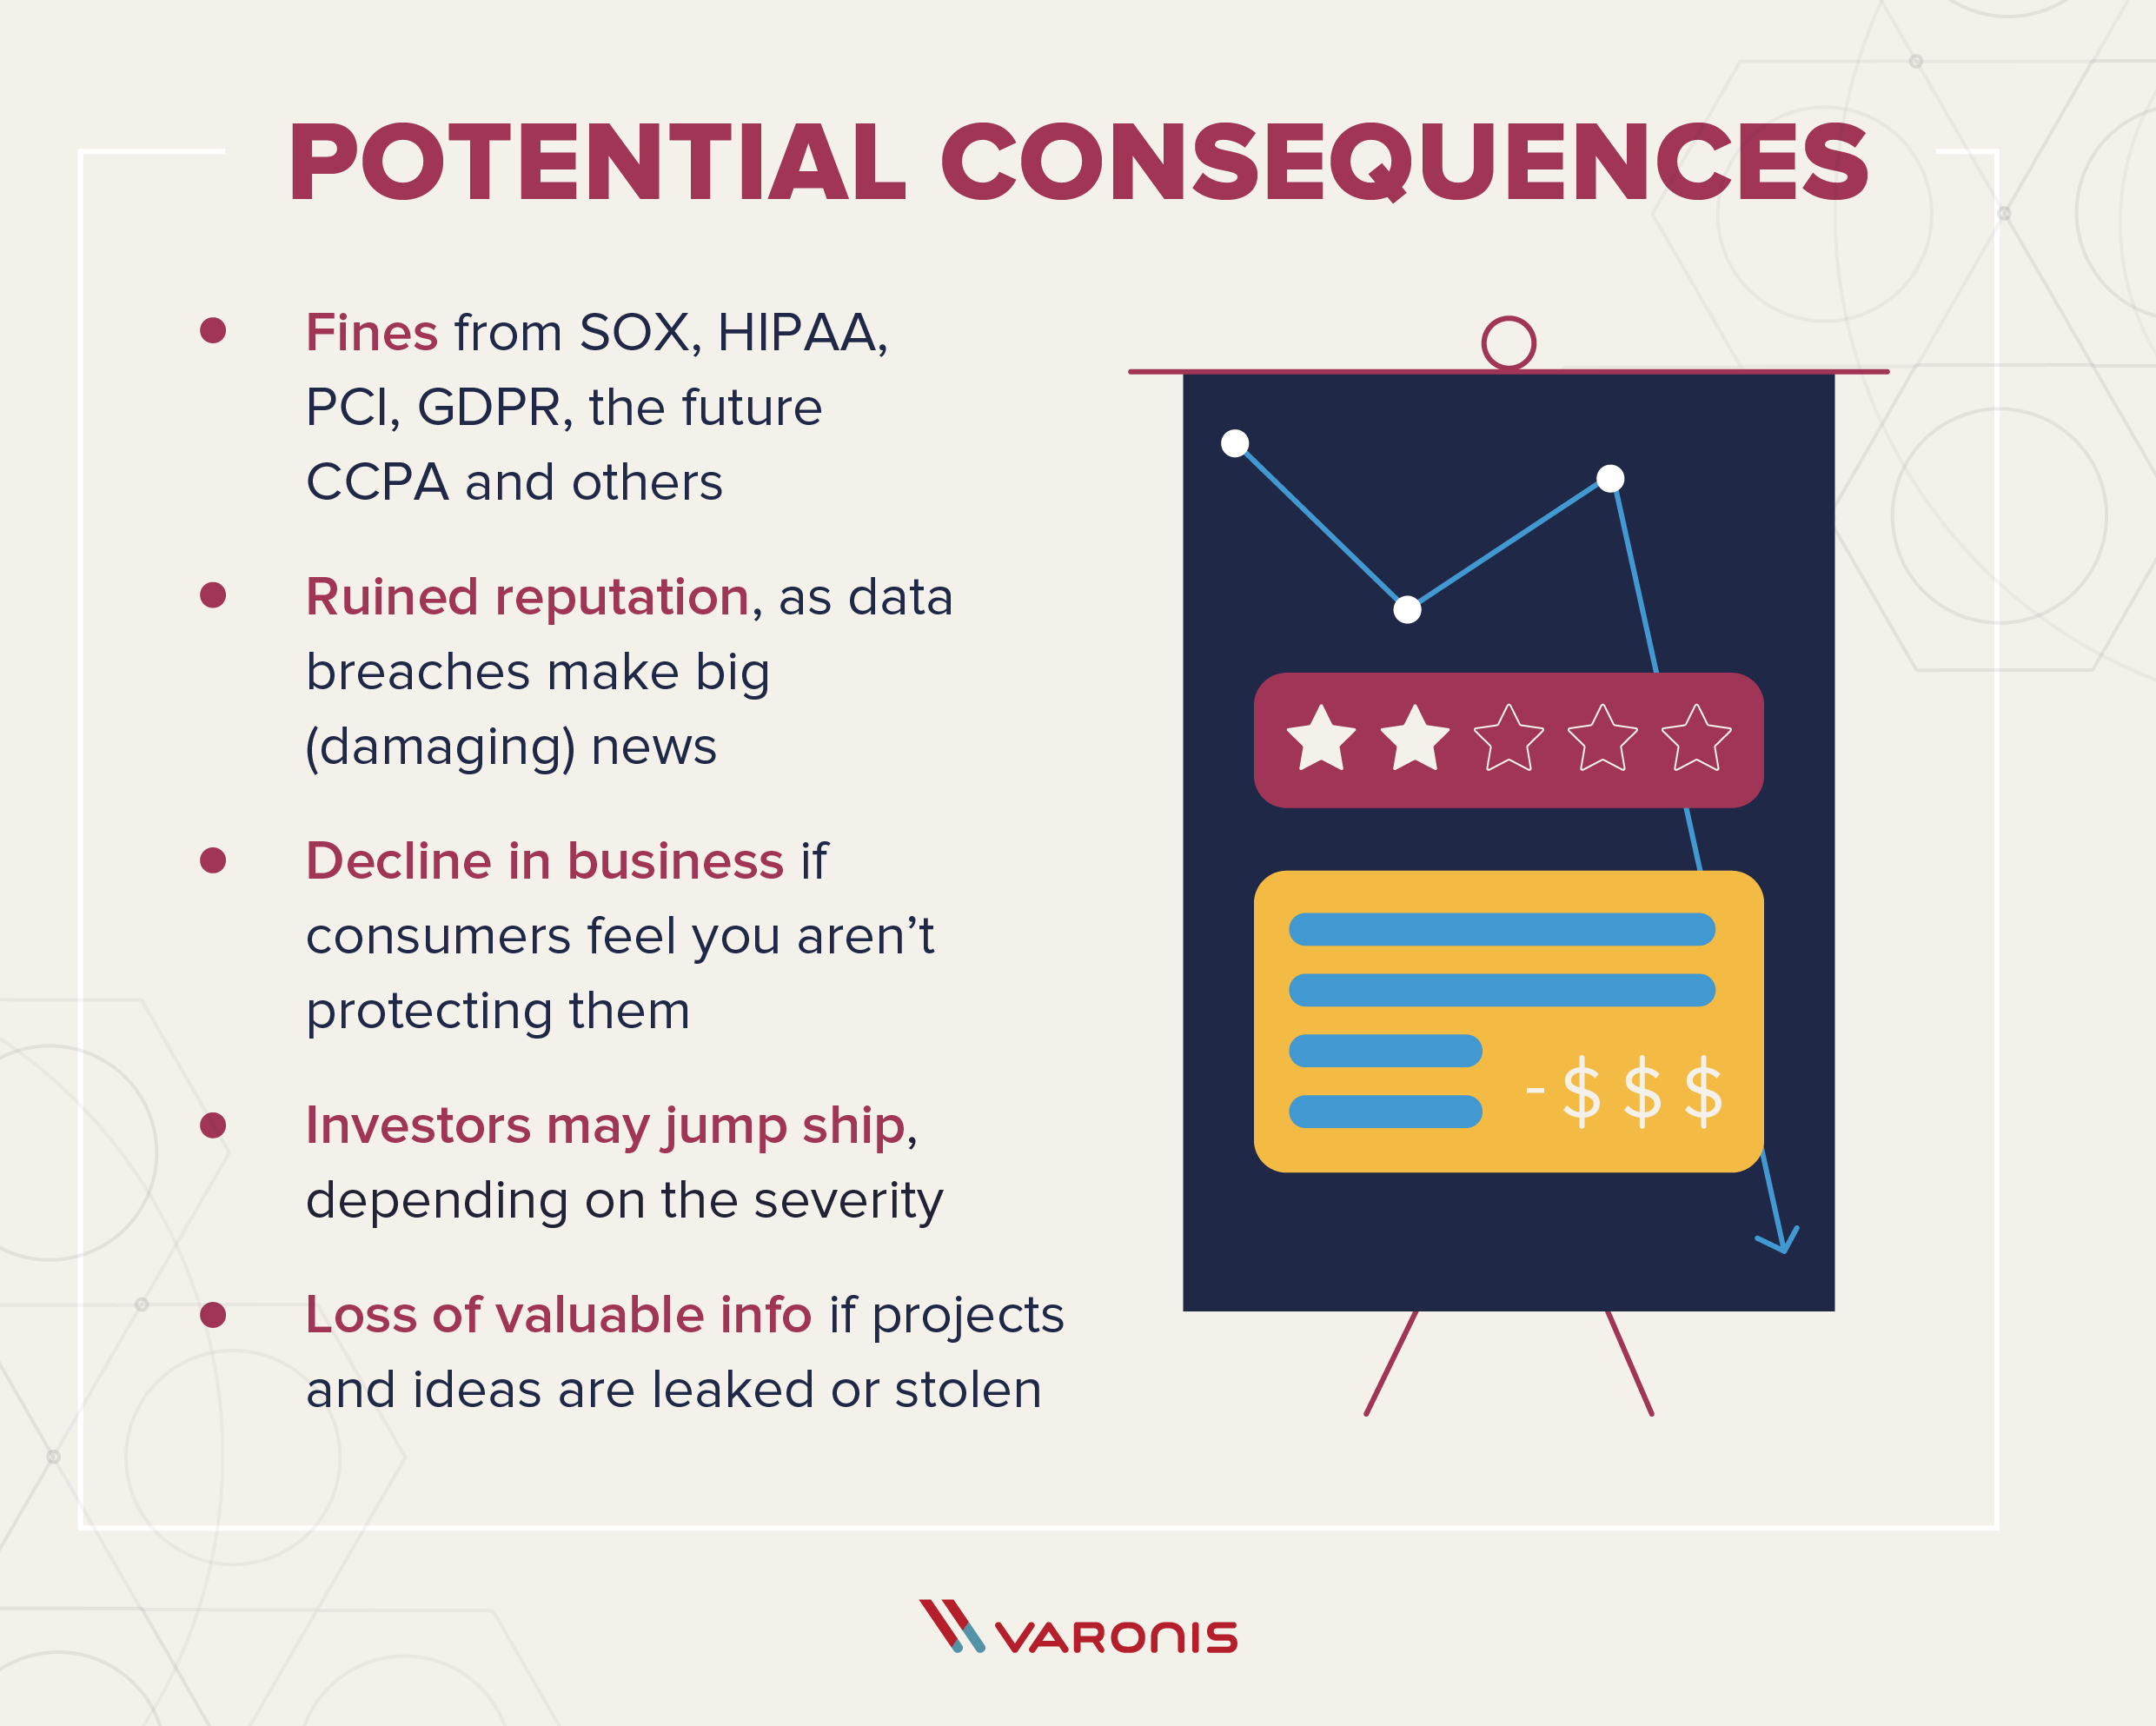 an illustration of graph chart with text on the left of it that says: Title: Potential Consequences. Subtext: If a breach or violation occurs, companies with over-exposed sensitive data, non-expiring passwords and stale accounts and data leave themselves at risk for: Fines from SOX, HIPAA, PCI, GDPR, the future CCPA and others, Ruined reputation, as data breaches make big (damaging) news, Decline in business if consumers feel you aren’t protecting them, Stock drops. Depending on the severity, investors may jump ship, Loss of valuable info if projects and ideas are leaked or stolen.